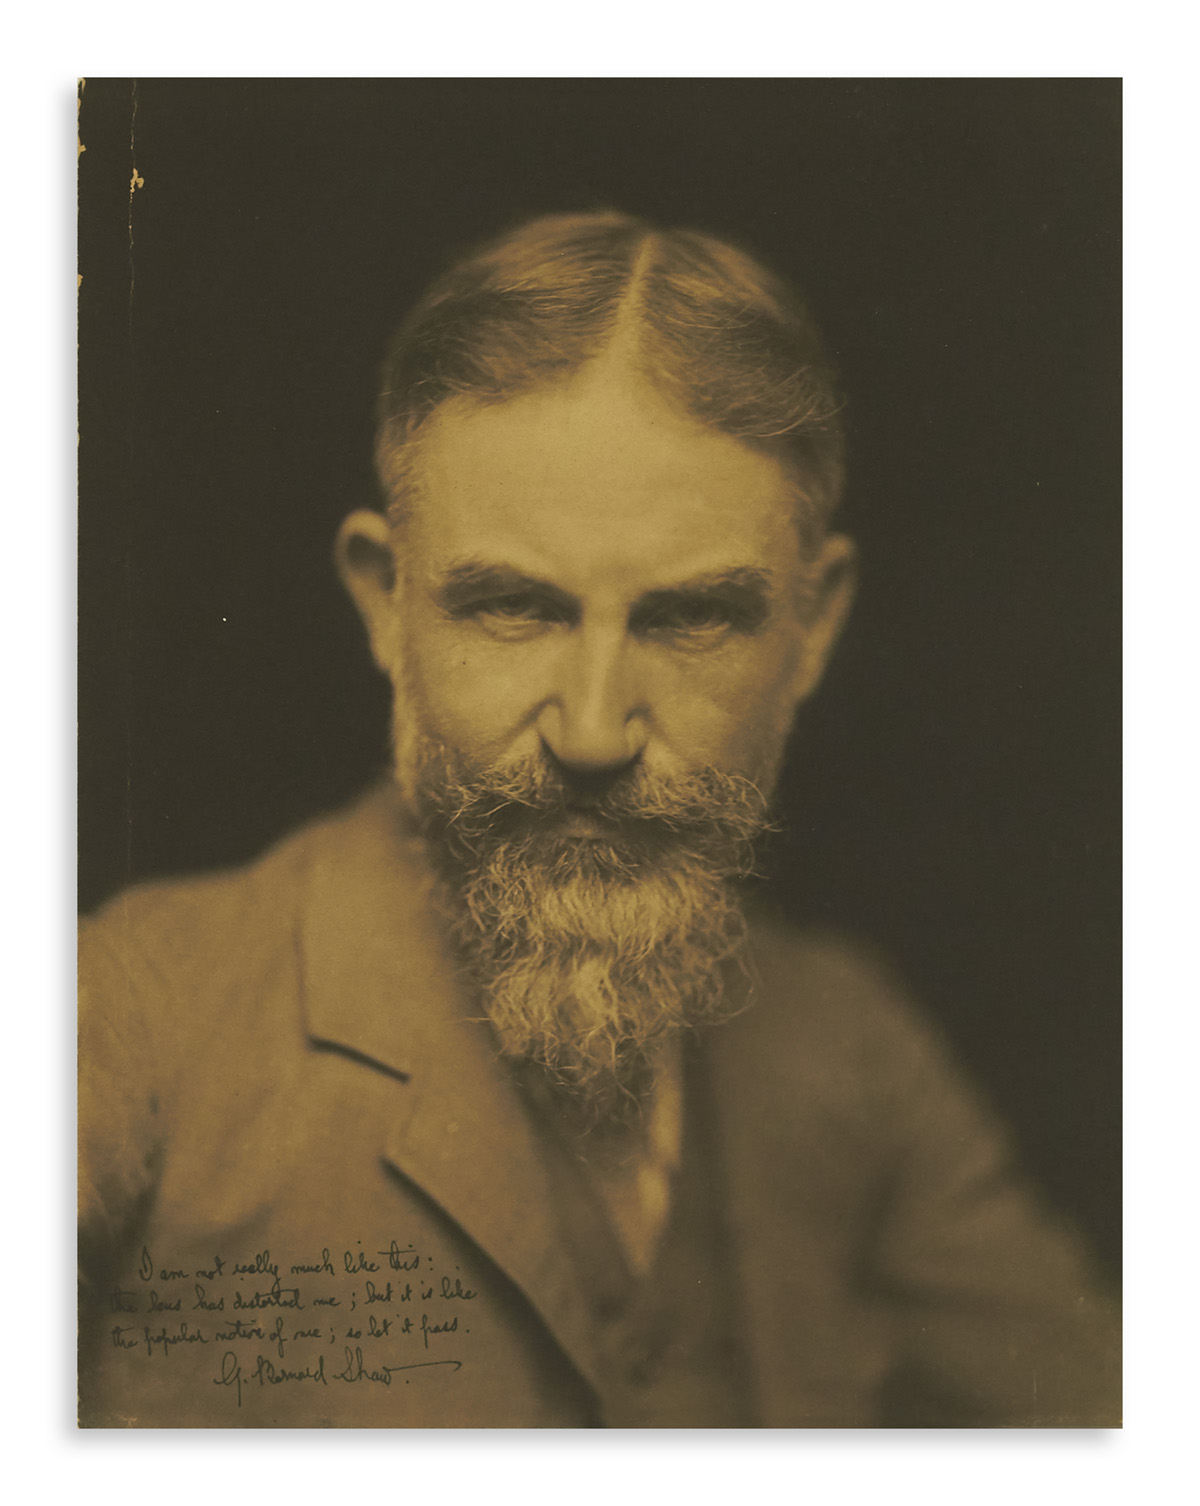 SHAW, GEORGE BERNARD. Photograph Signed and Inscribed, I am not really much like this: / the lens has distorted me; but it is like / t